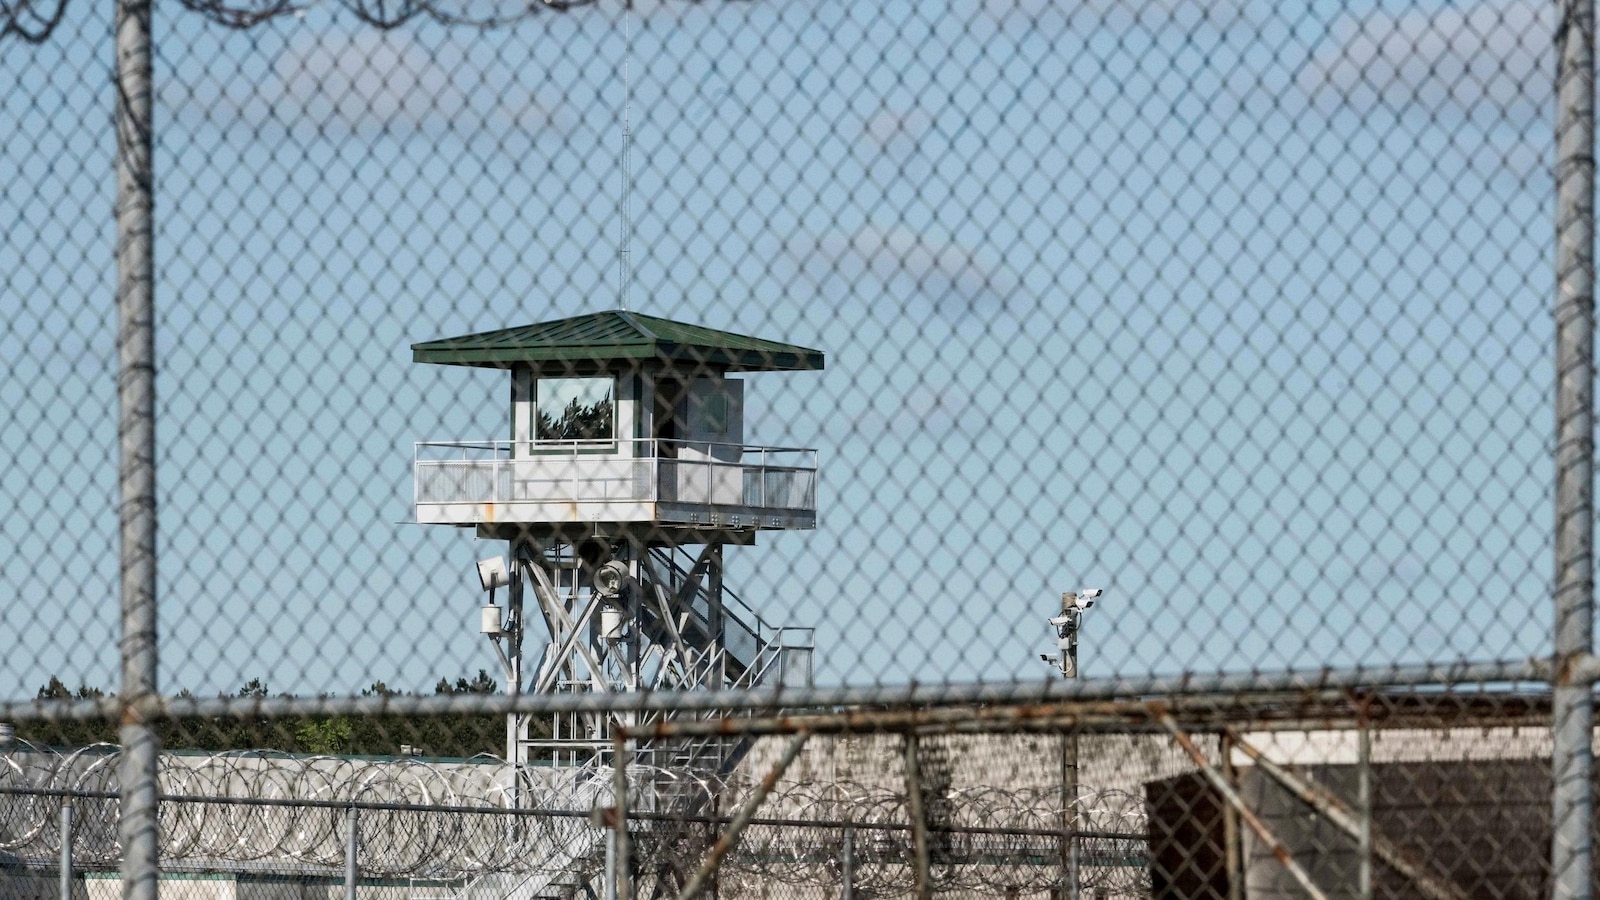 South Carolina bans inmates from in-person interviews. A lawsuit wants to change that